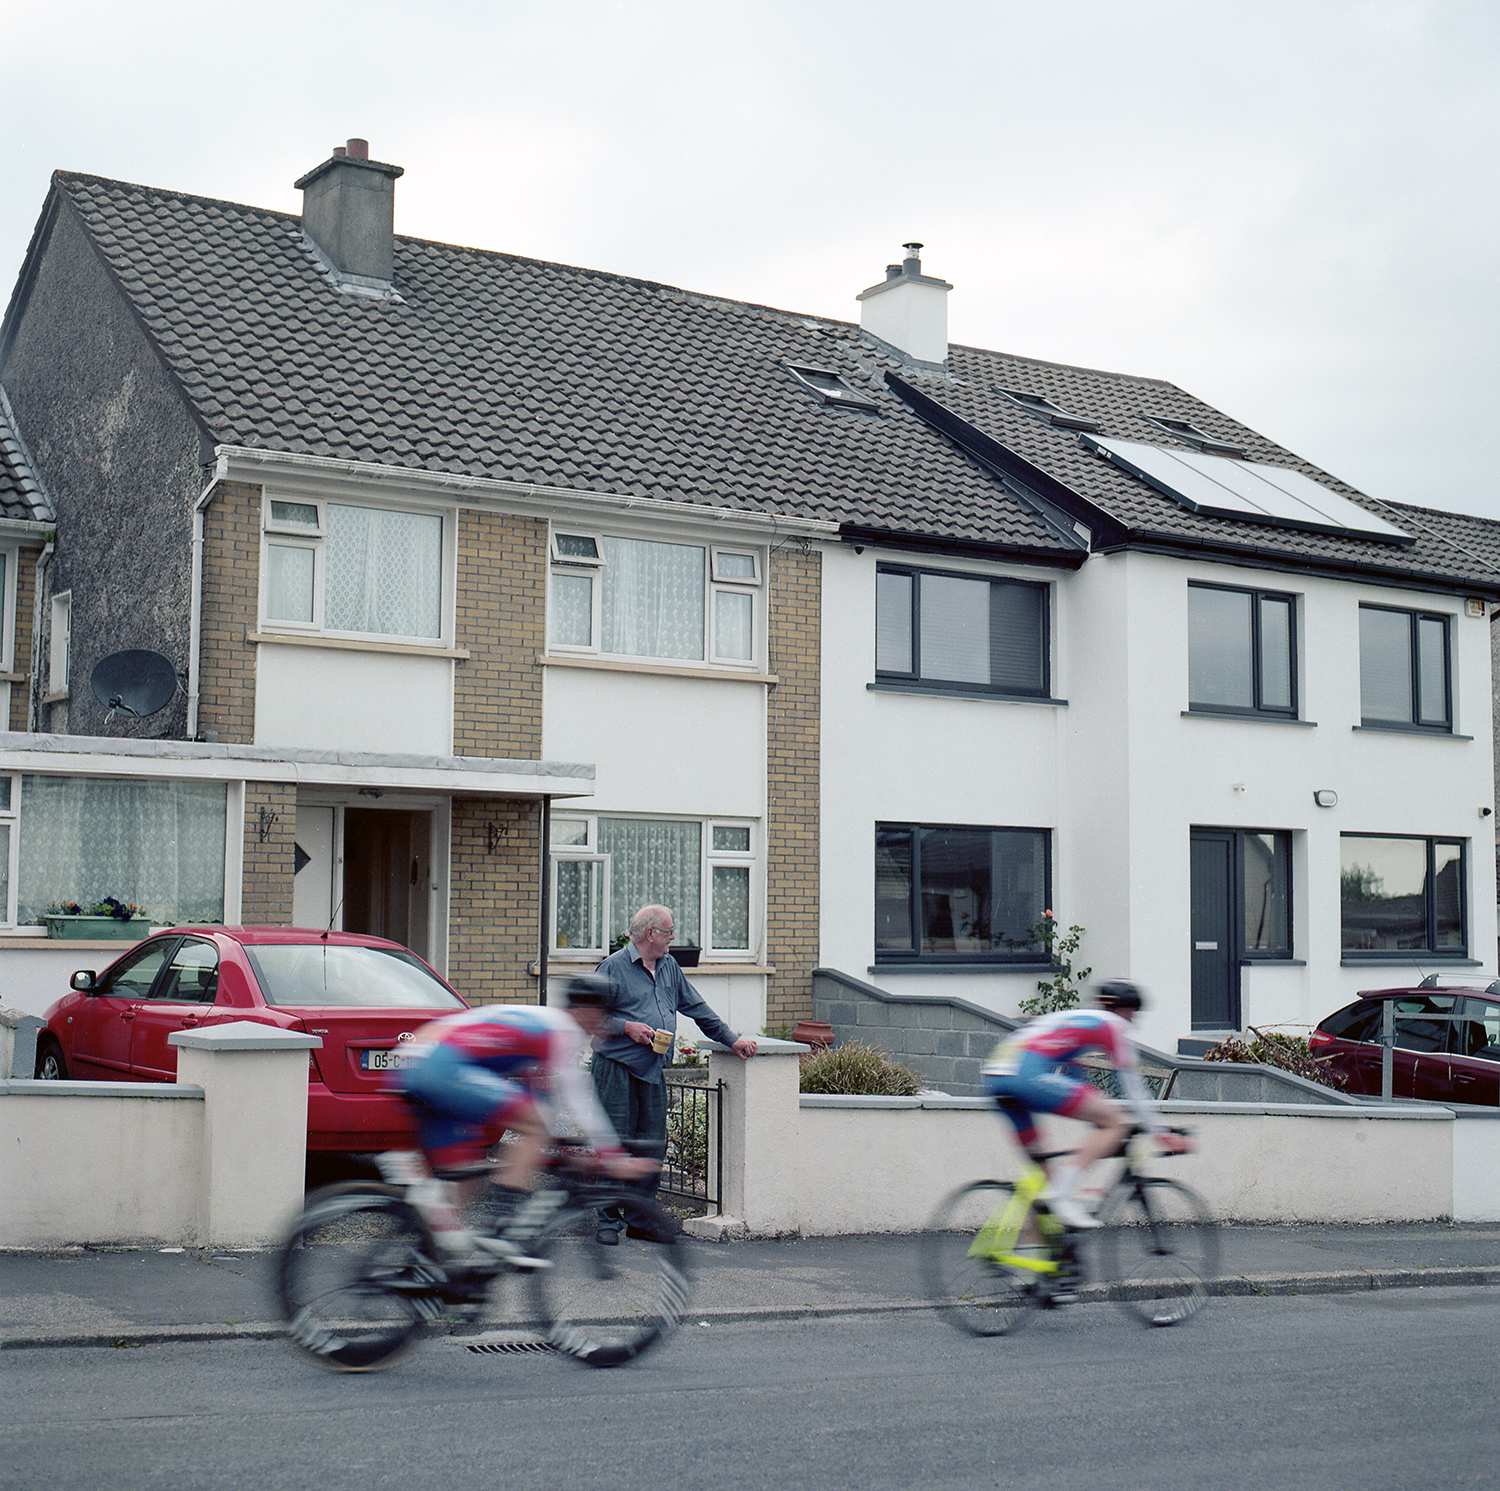 Galway Bay Cycling club, highfield park crit, film photography, donal kelly